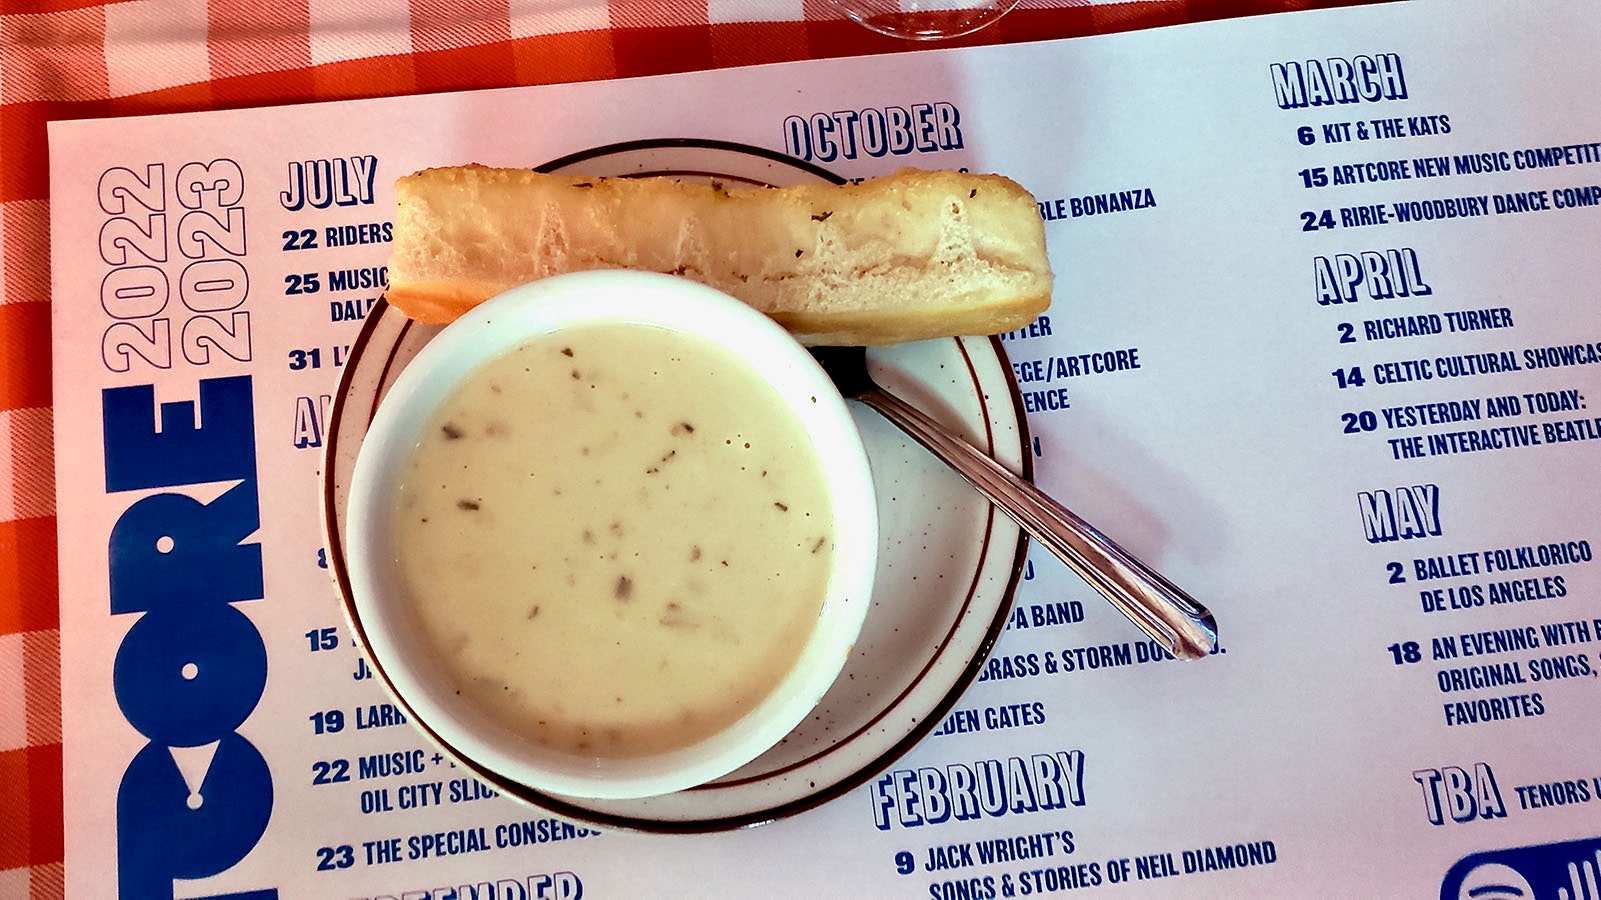 The mushroom soup at Bosco's is delicious.